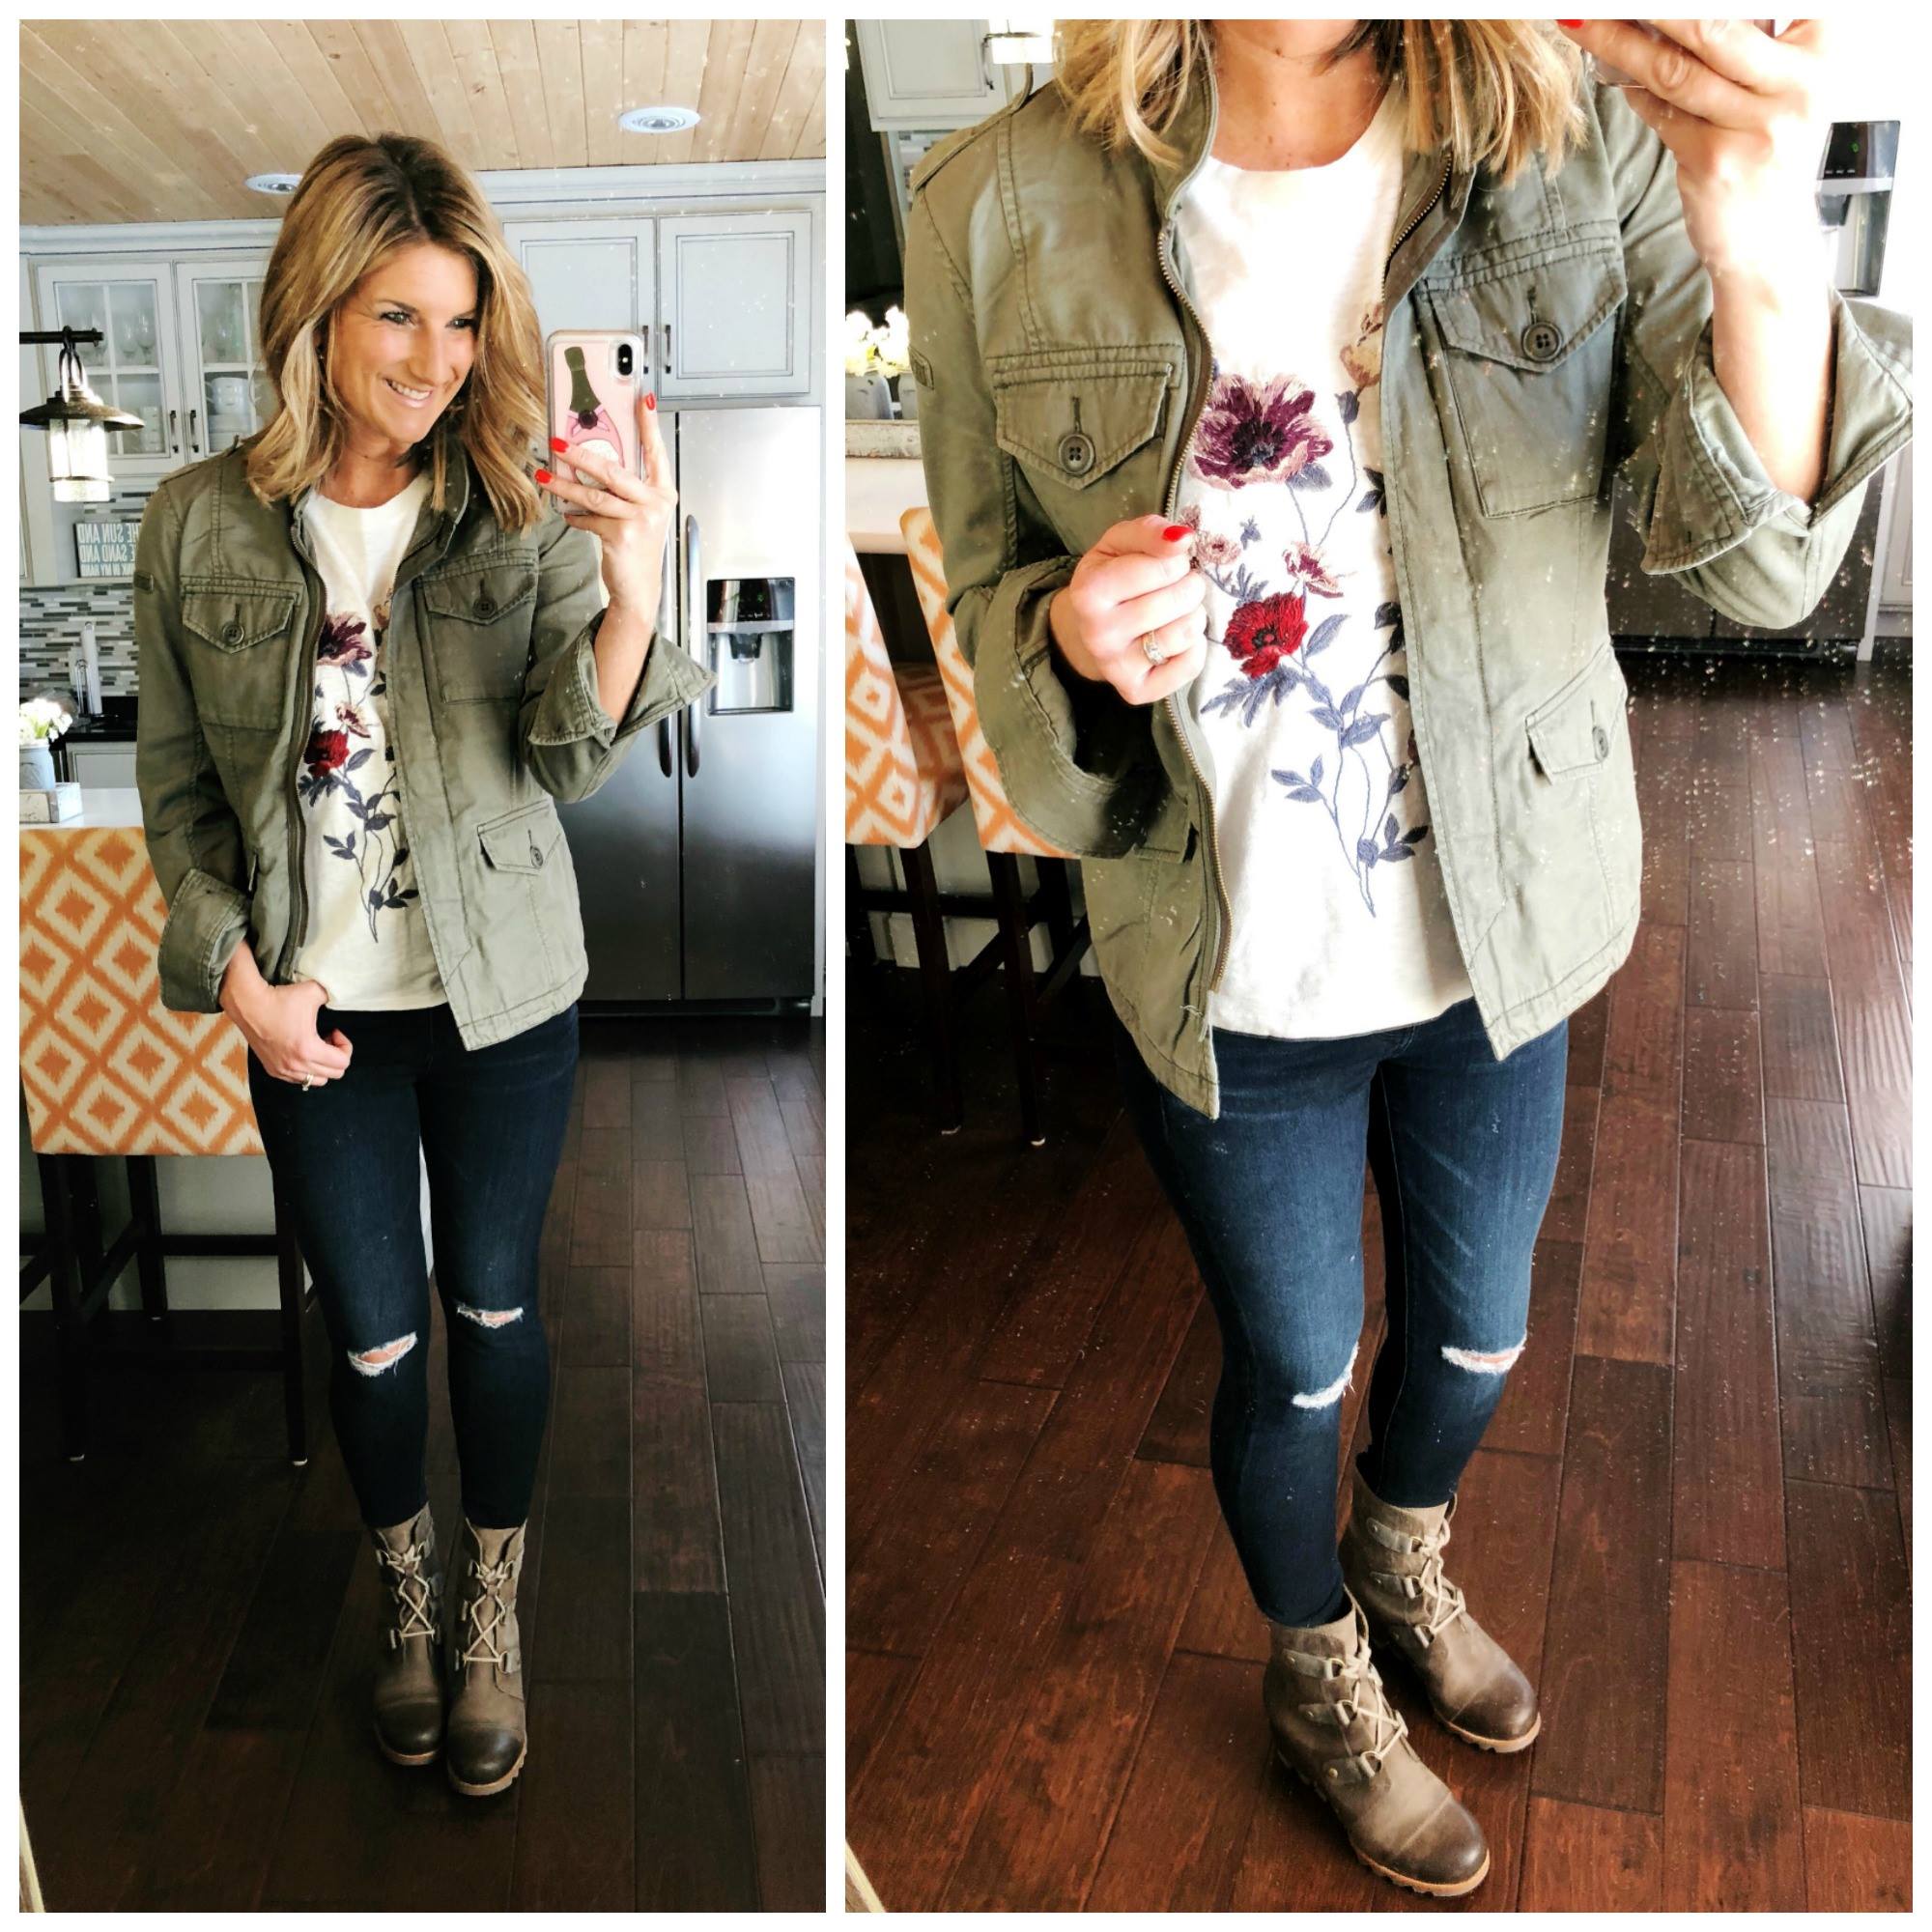 Embroidered Top + Military Jacket + Distressed Jeans + Wedge Boots // Spring Outfit 